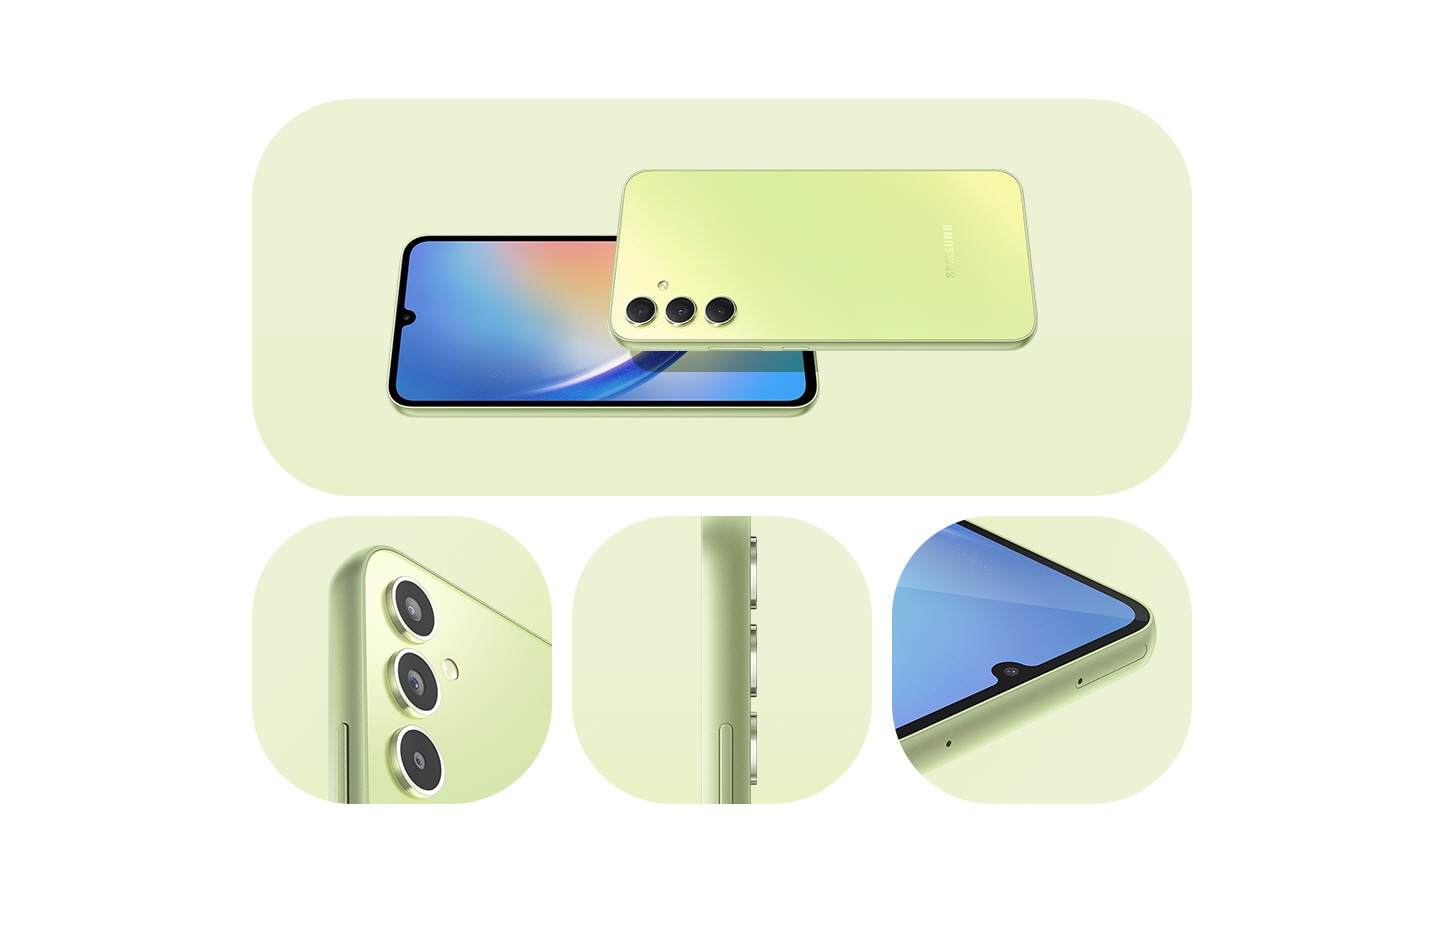 1. The Galaxy A34 5G's design is shown with devices in Awesome Lime. The front and backsides are shown, along with more close-up shots of the backside multi-camera system, the side, and front camera.